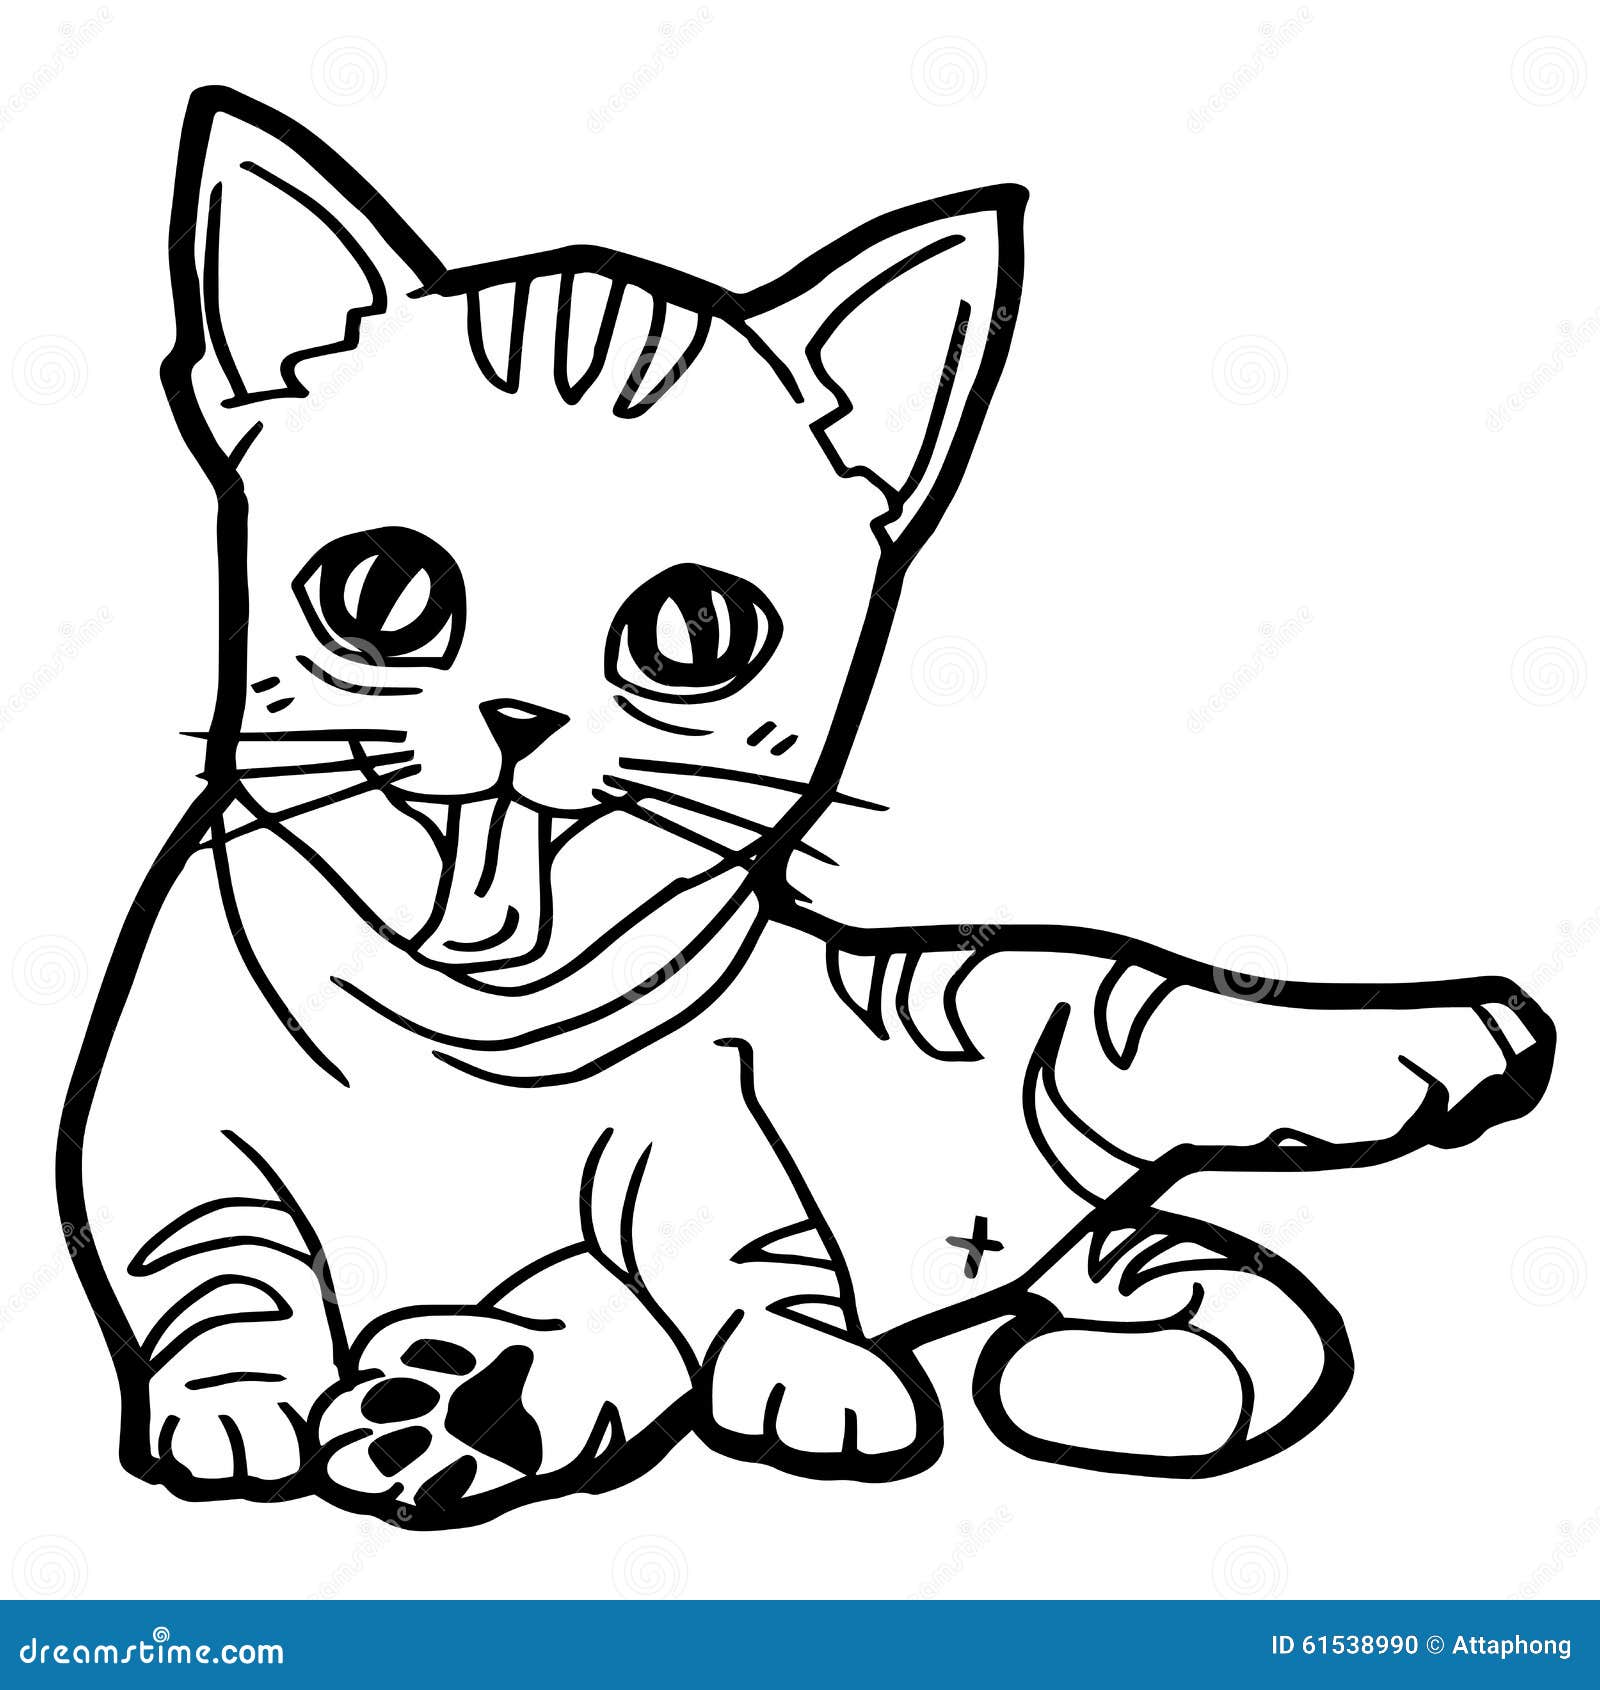 Cartoon Cat Coloring Page stock vector. Image of gold - 61538990